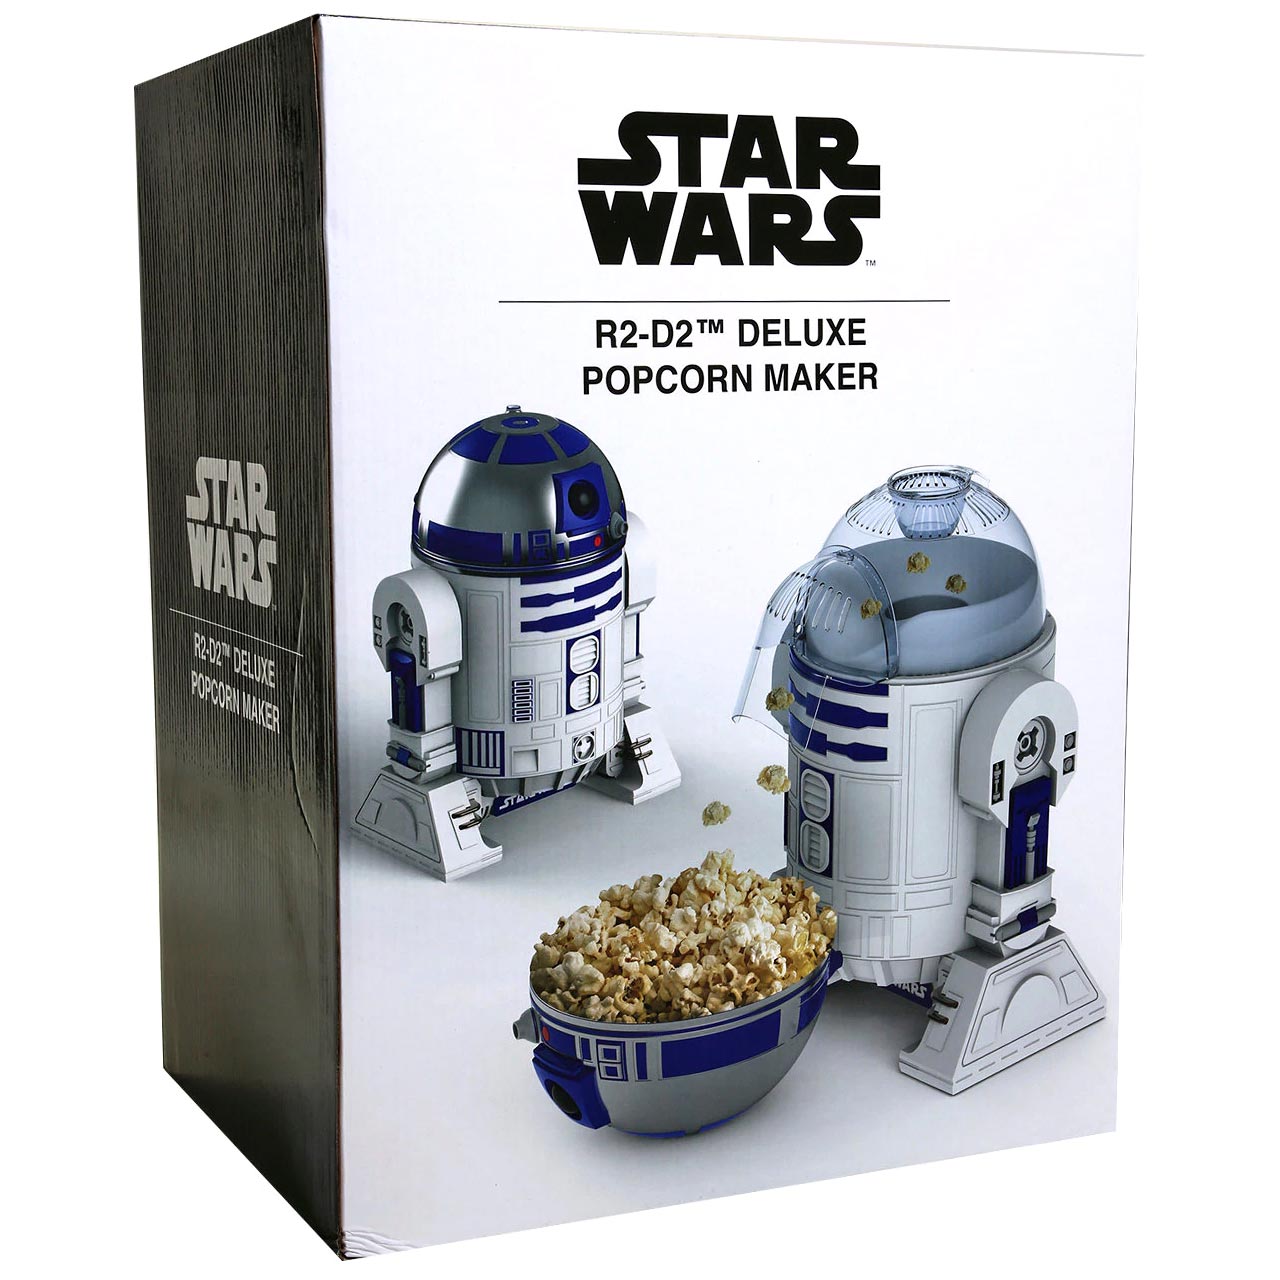 Bring The Force To Snack Time Thanks To This R2-D2 Popcorn Maker